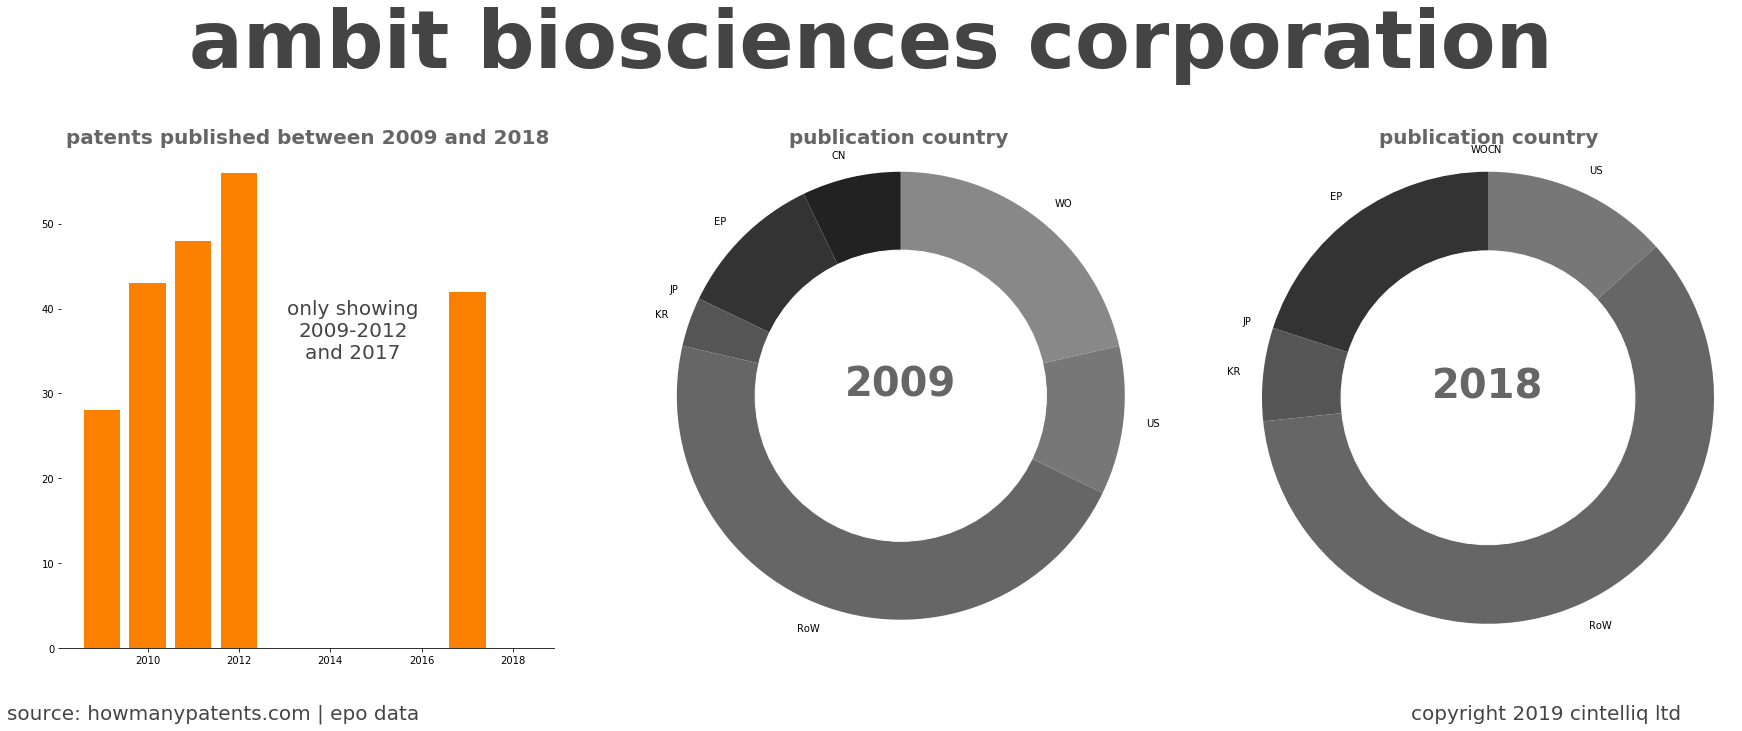 summary of patents for Ambit Biosciences Corporation